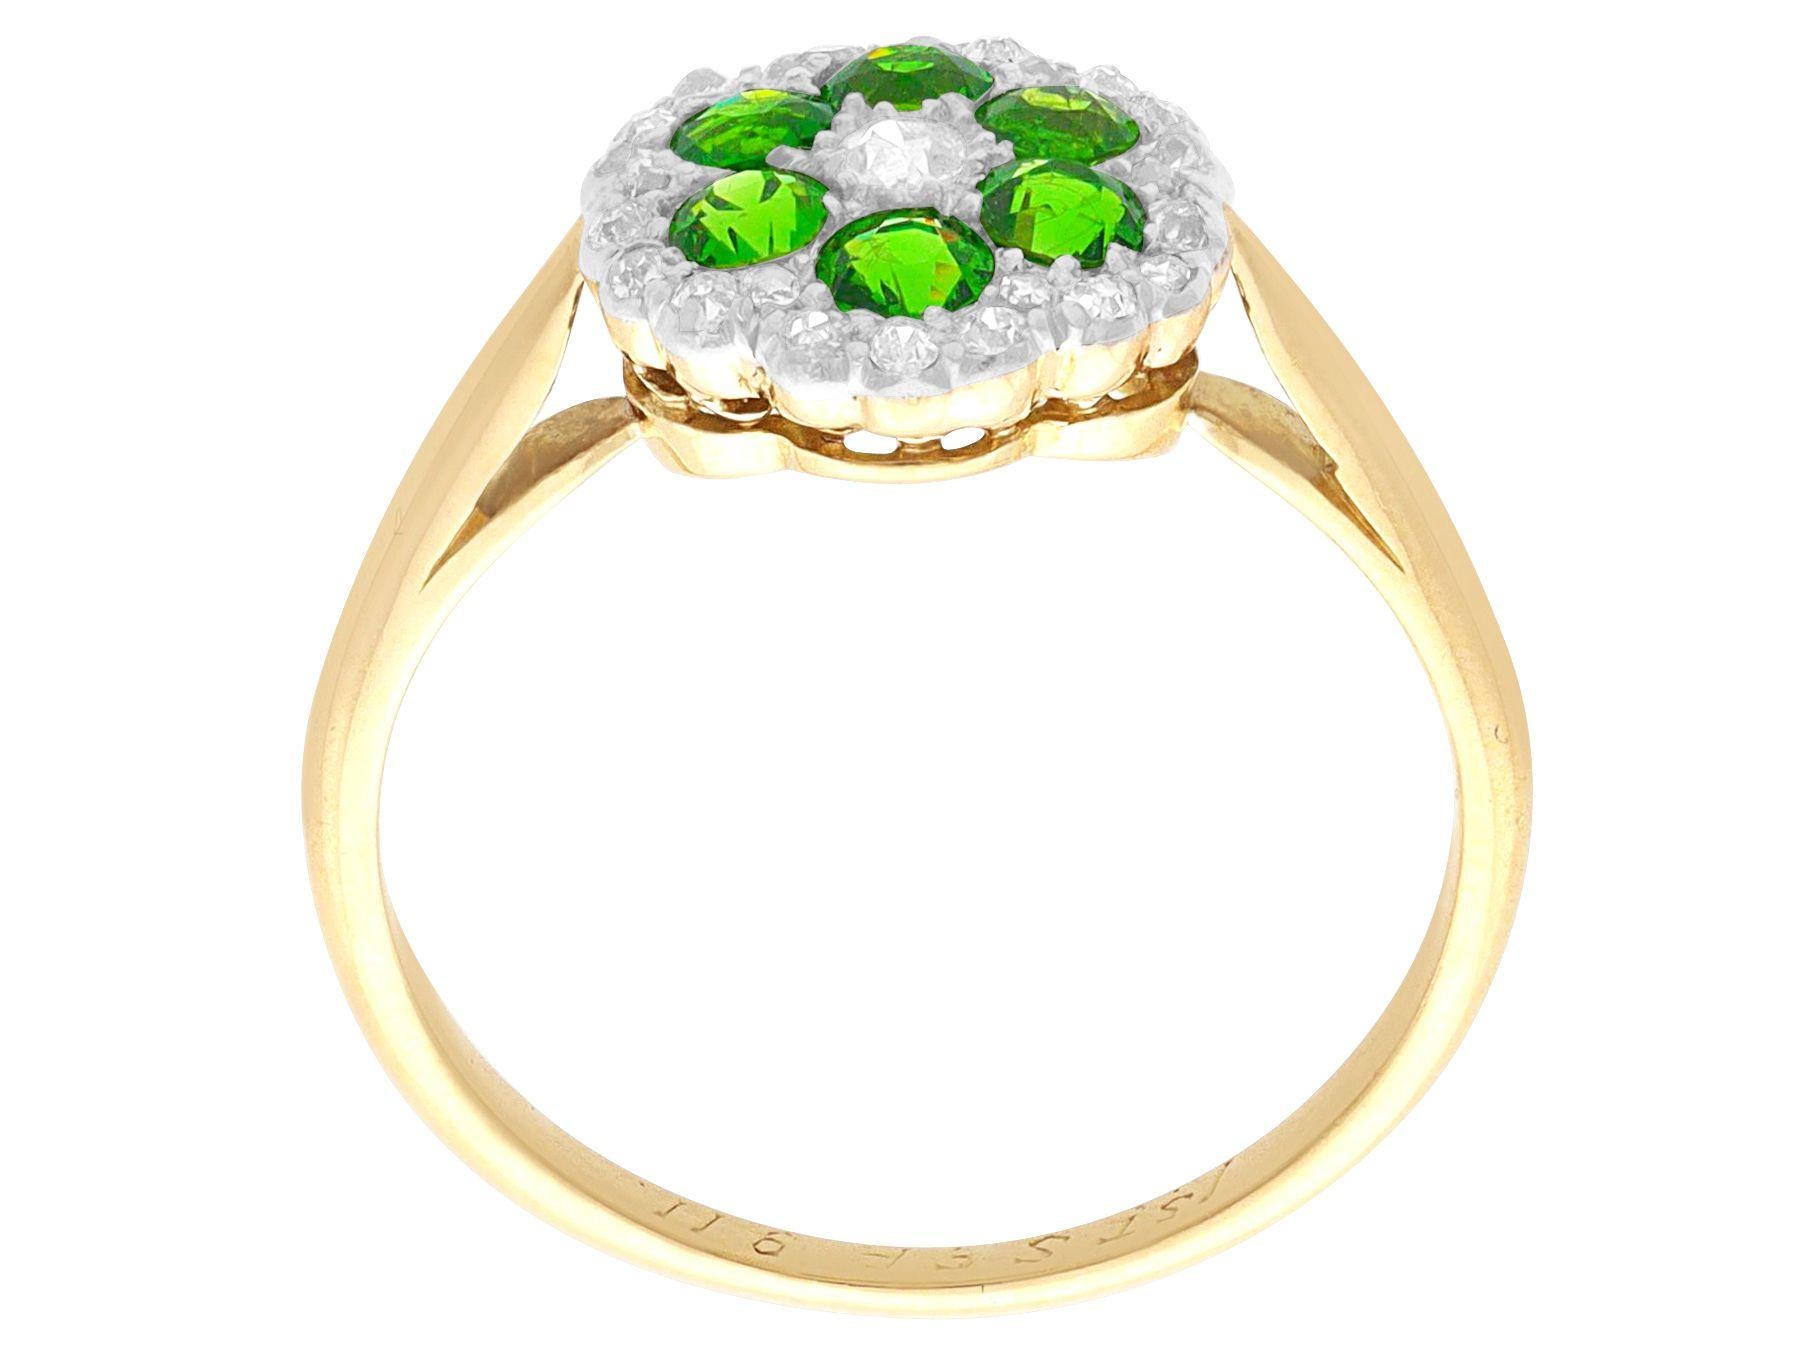 Women's or Men's Antique Diamond and Demantoid Garnet Yellow Gold Cocktail Ring Circa 1910 For Sale